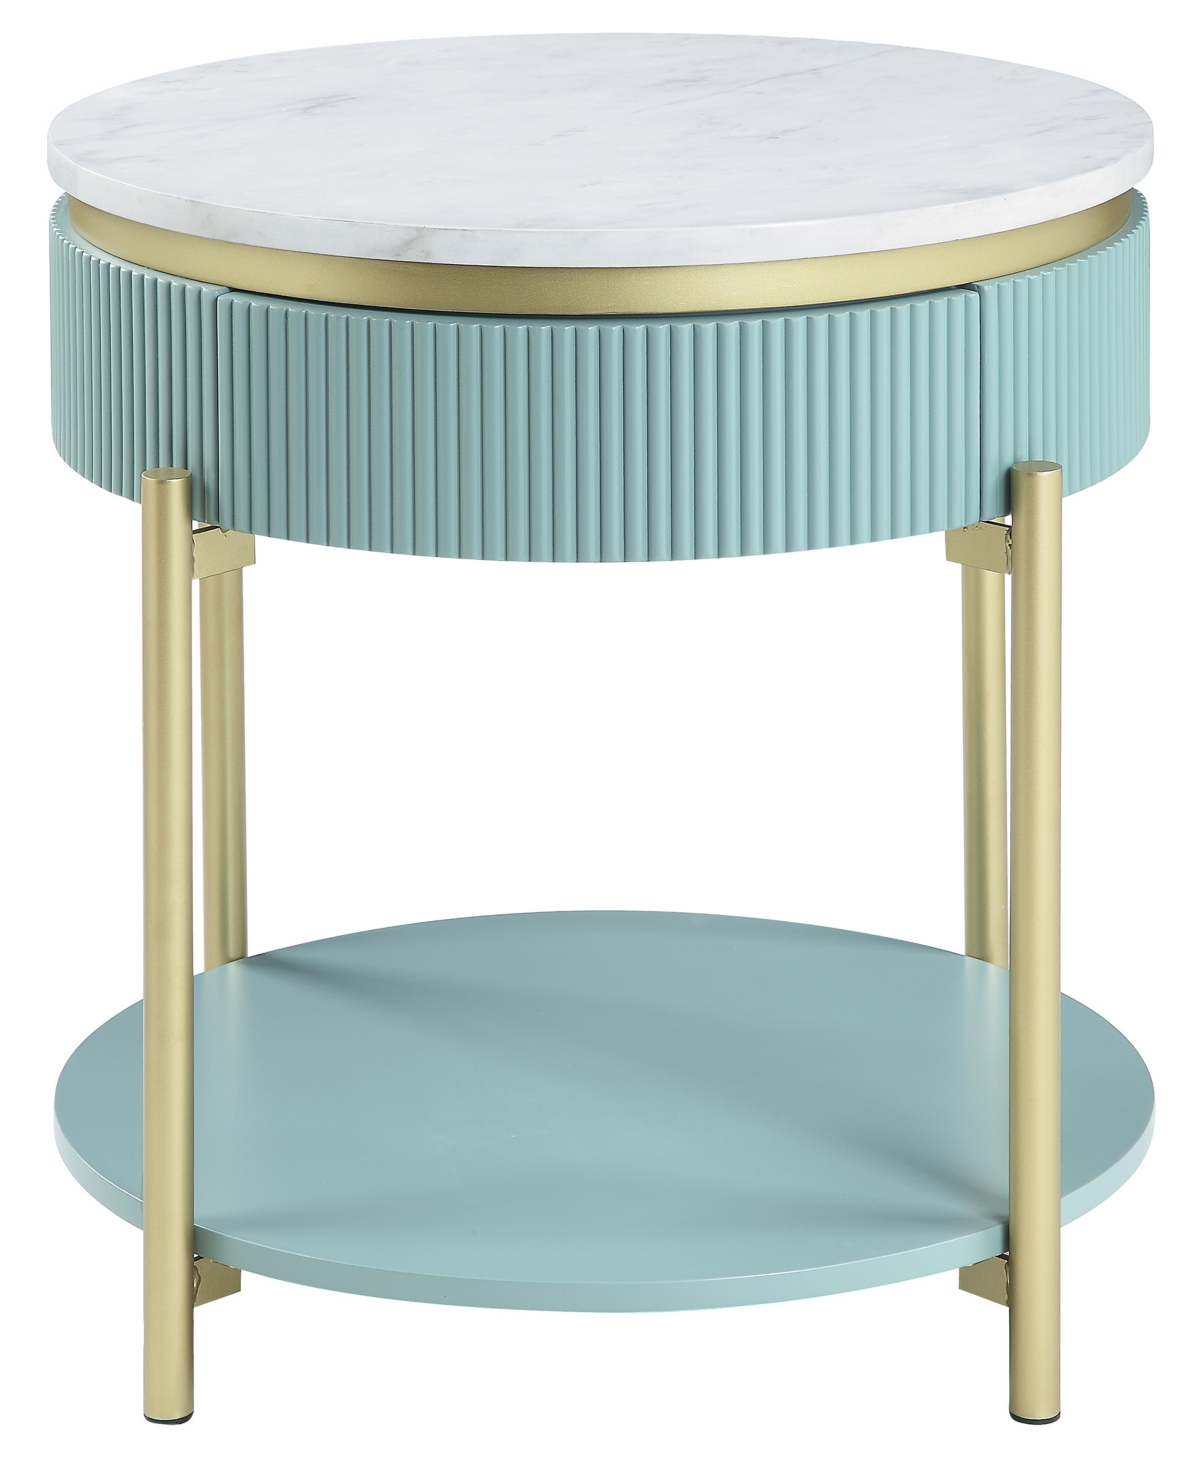 Furniture Of America Marei 1 Drawer End Table In Green,white,gold-tone